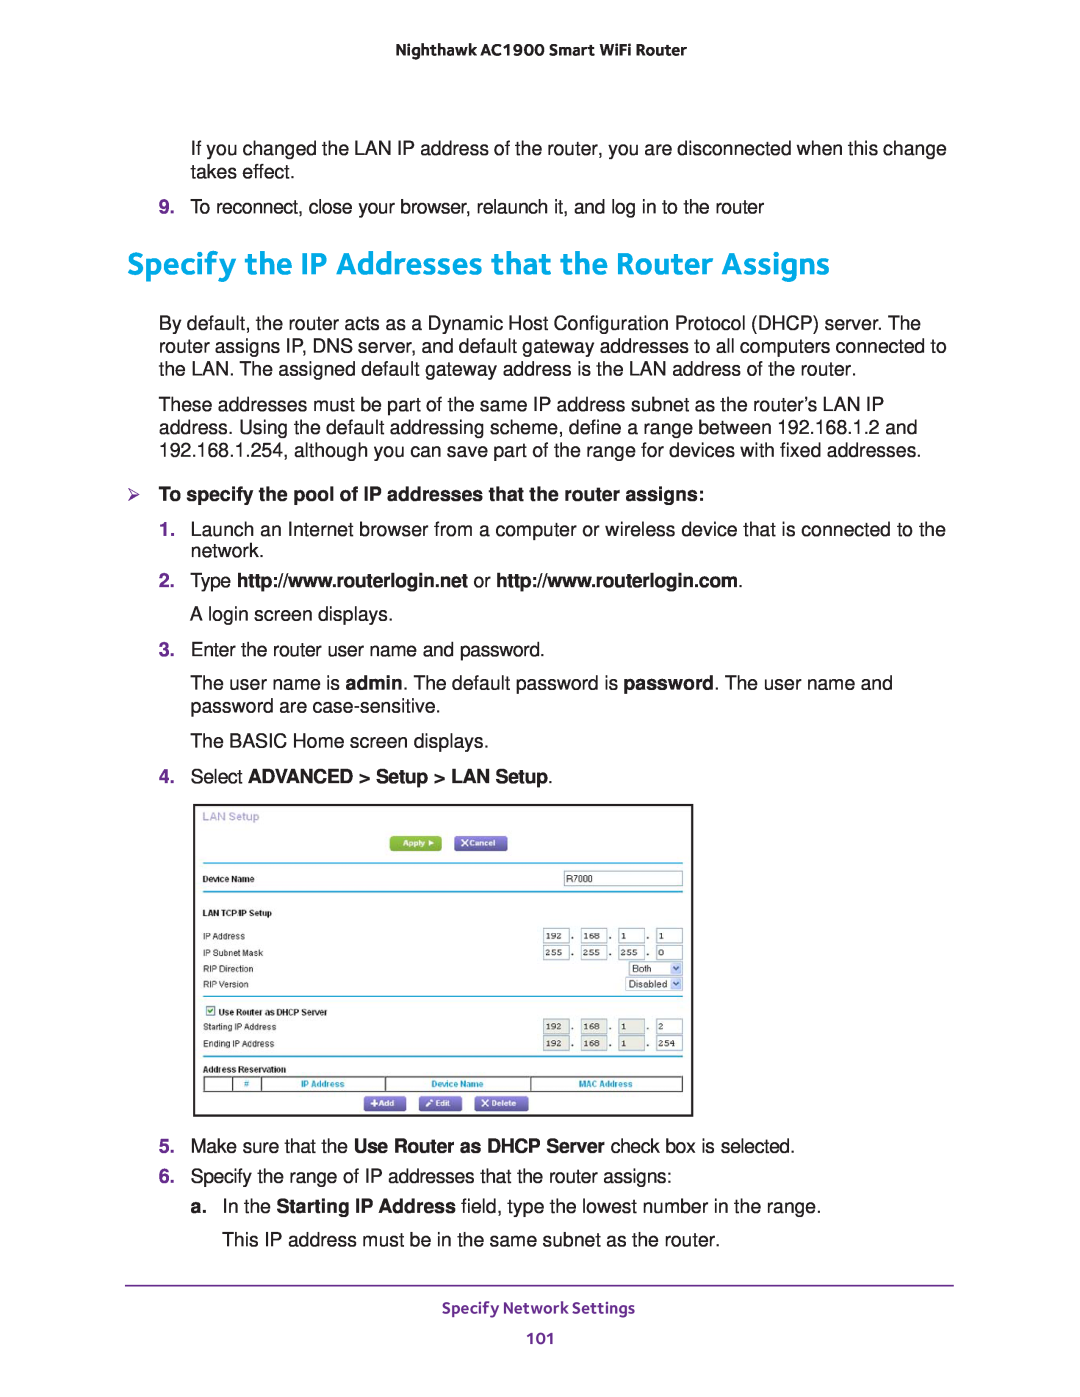 NETGEAR Model R7000 user manual Specify the IP Addresses that the Router Assigns, Select ADVANCED Setup LAN Setup 